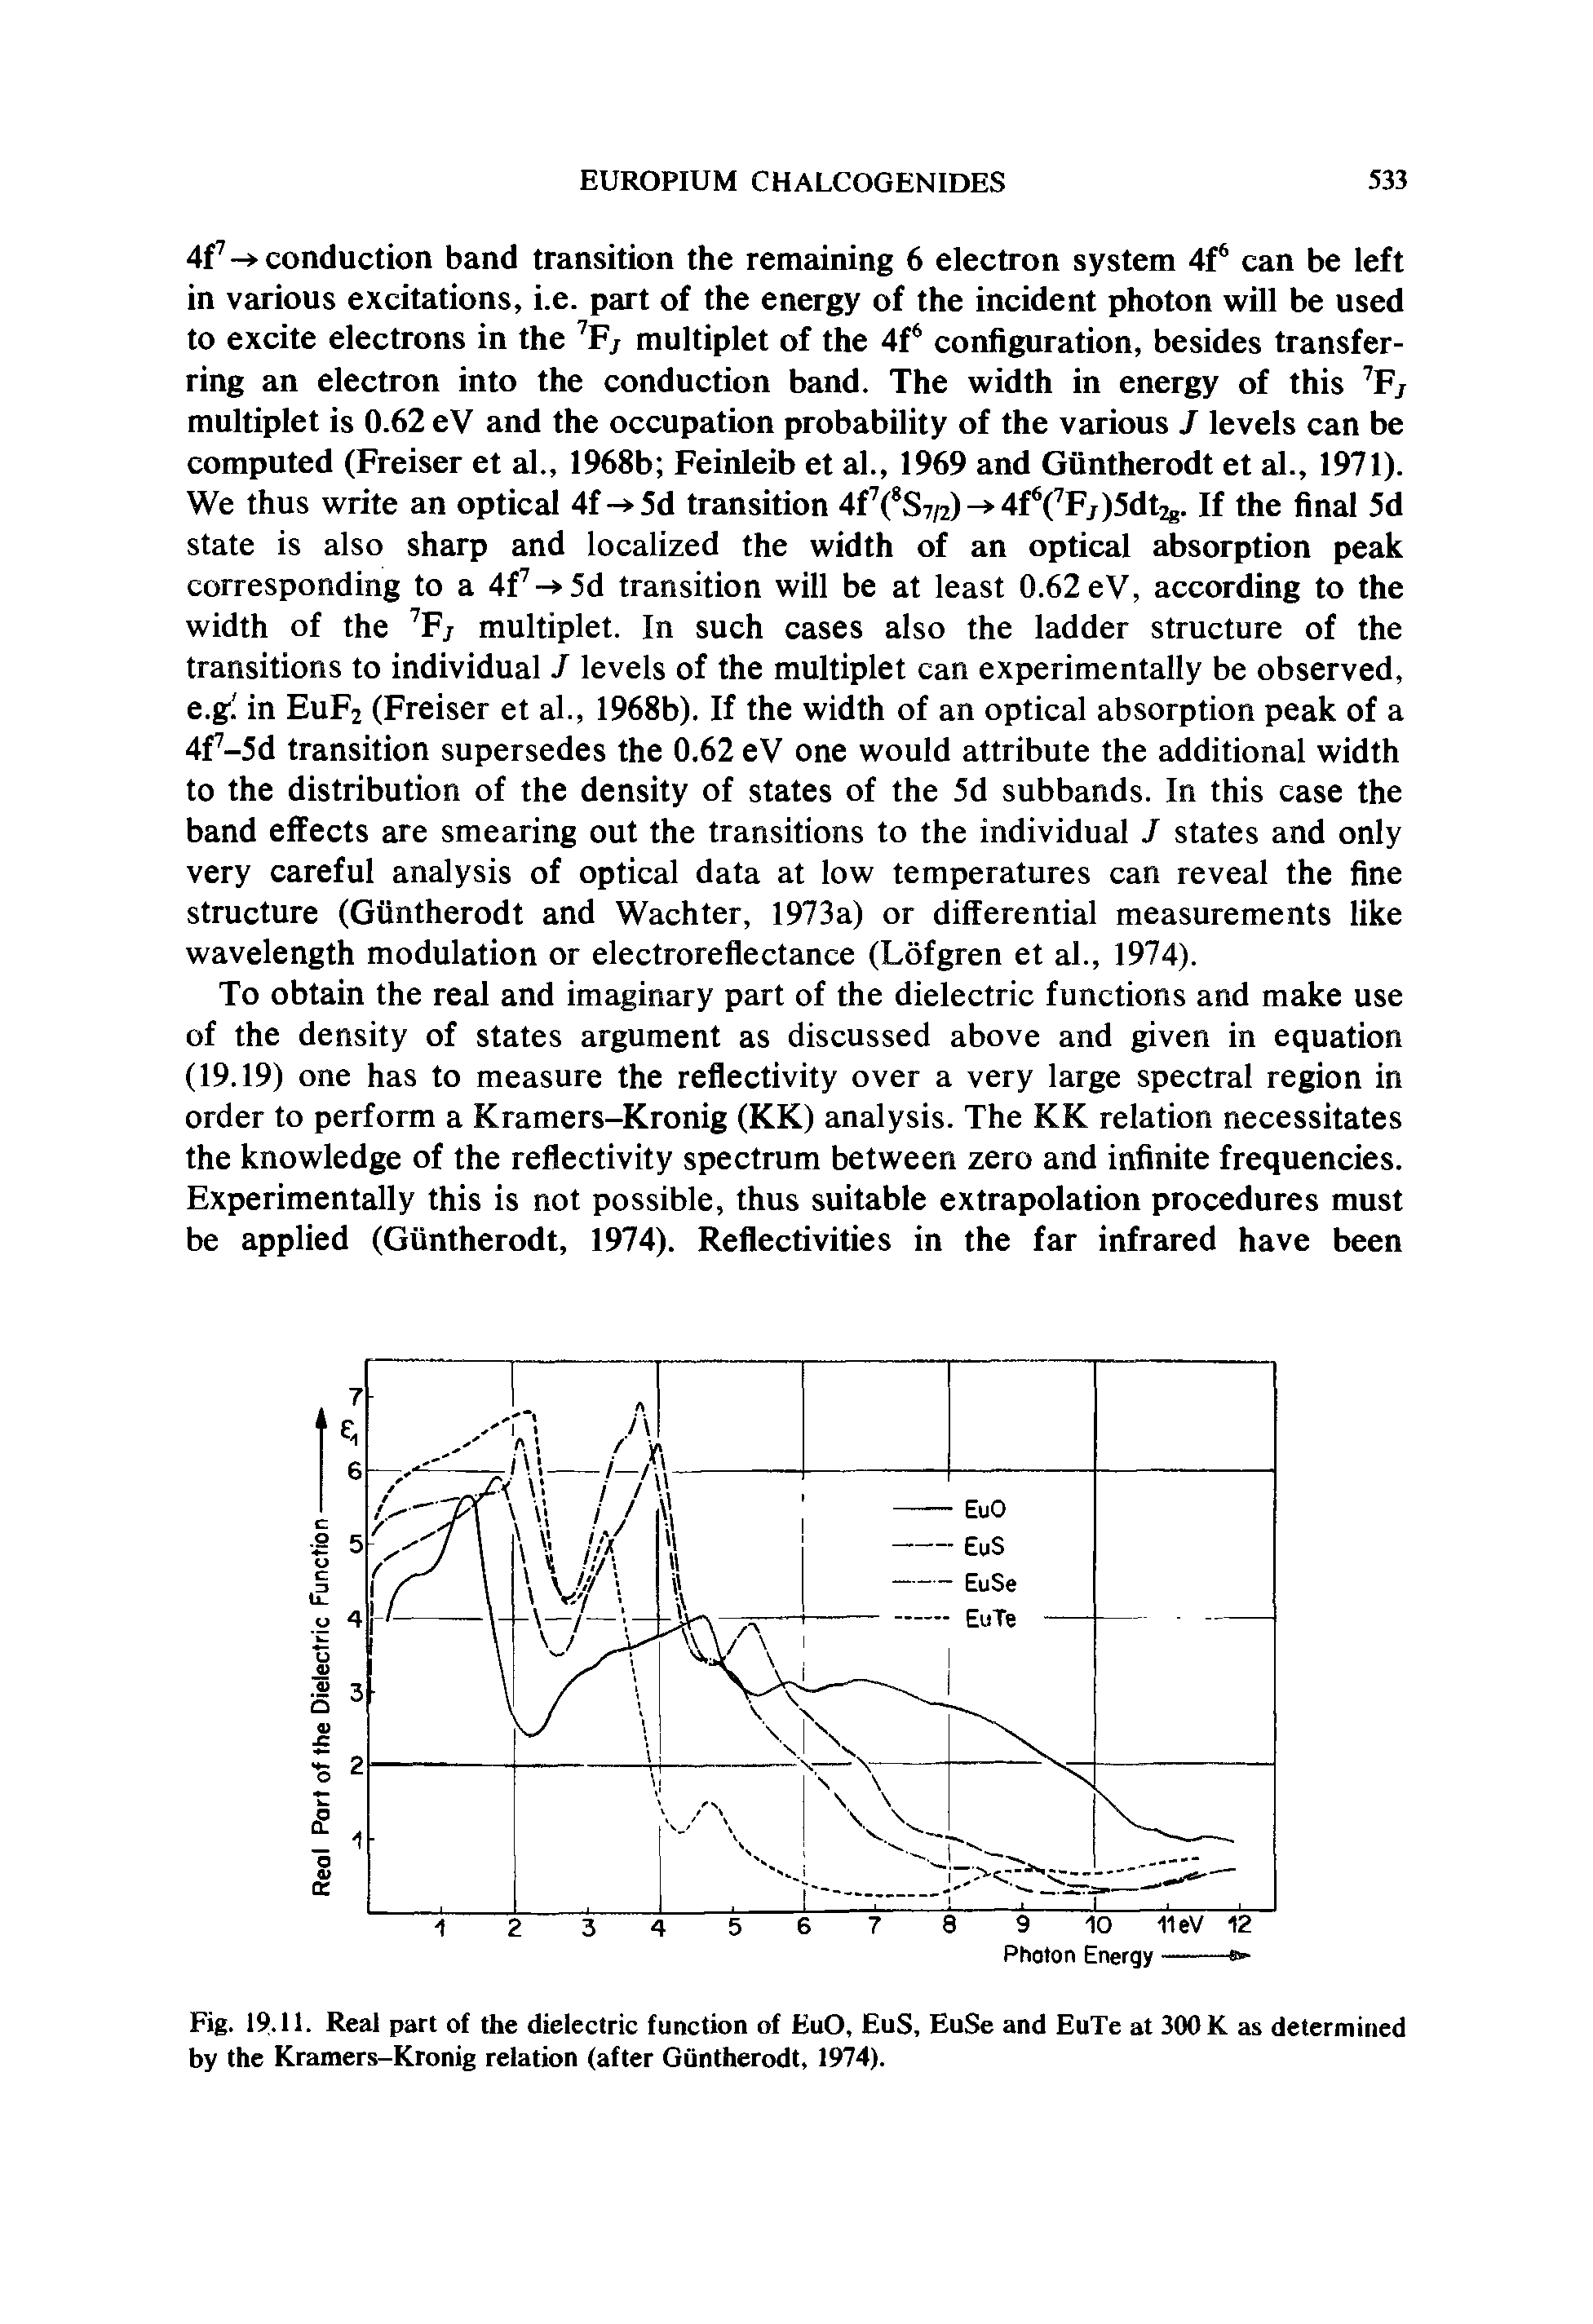 Fig. 19.11. Real part of the dielectric function of EuO, EuS, EuSe and EuTe at 300 K as determined by the Kramers-Kronig relation (after Guntherodt, 1974).